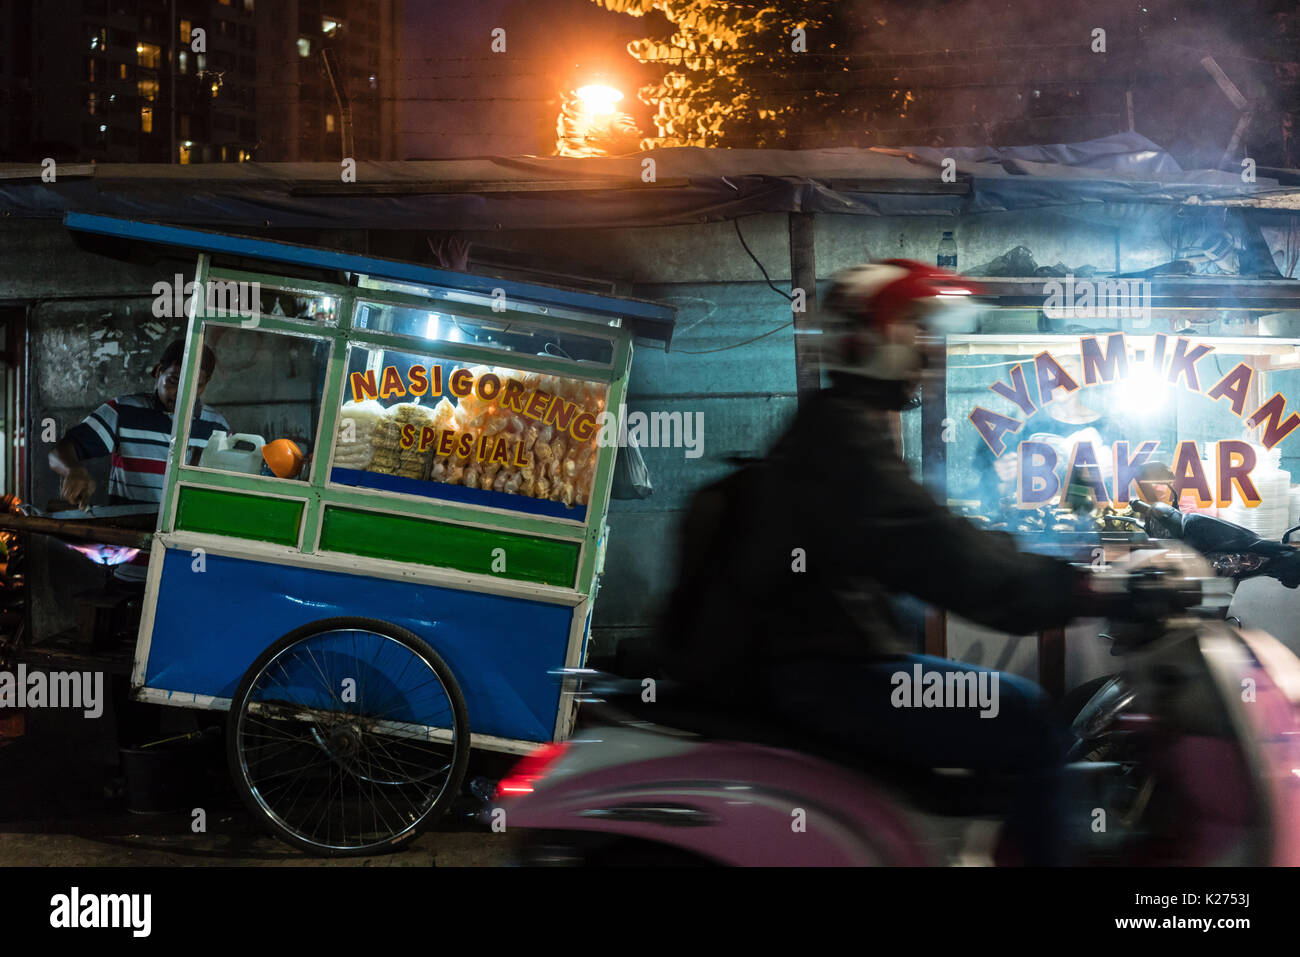 Man riding a scooter on a street with food stalls in a poor dist Stock Photo